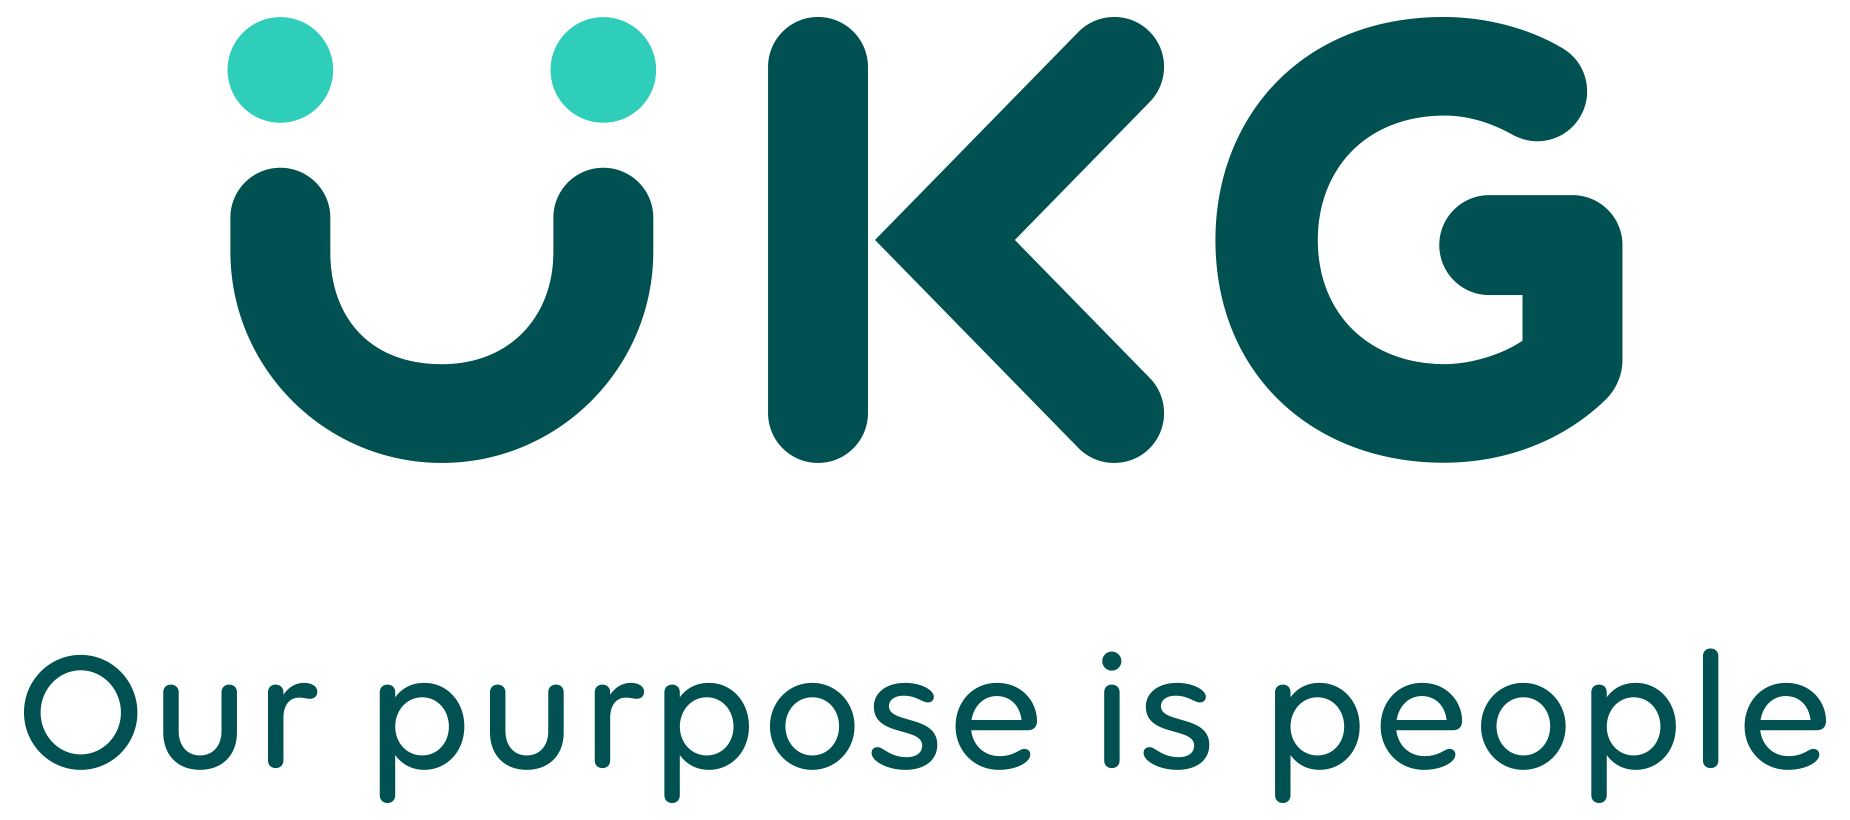 UKG logo with tagline "Our purpose is people"